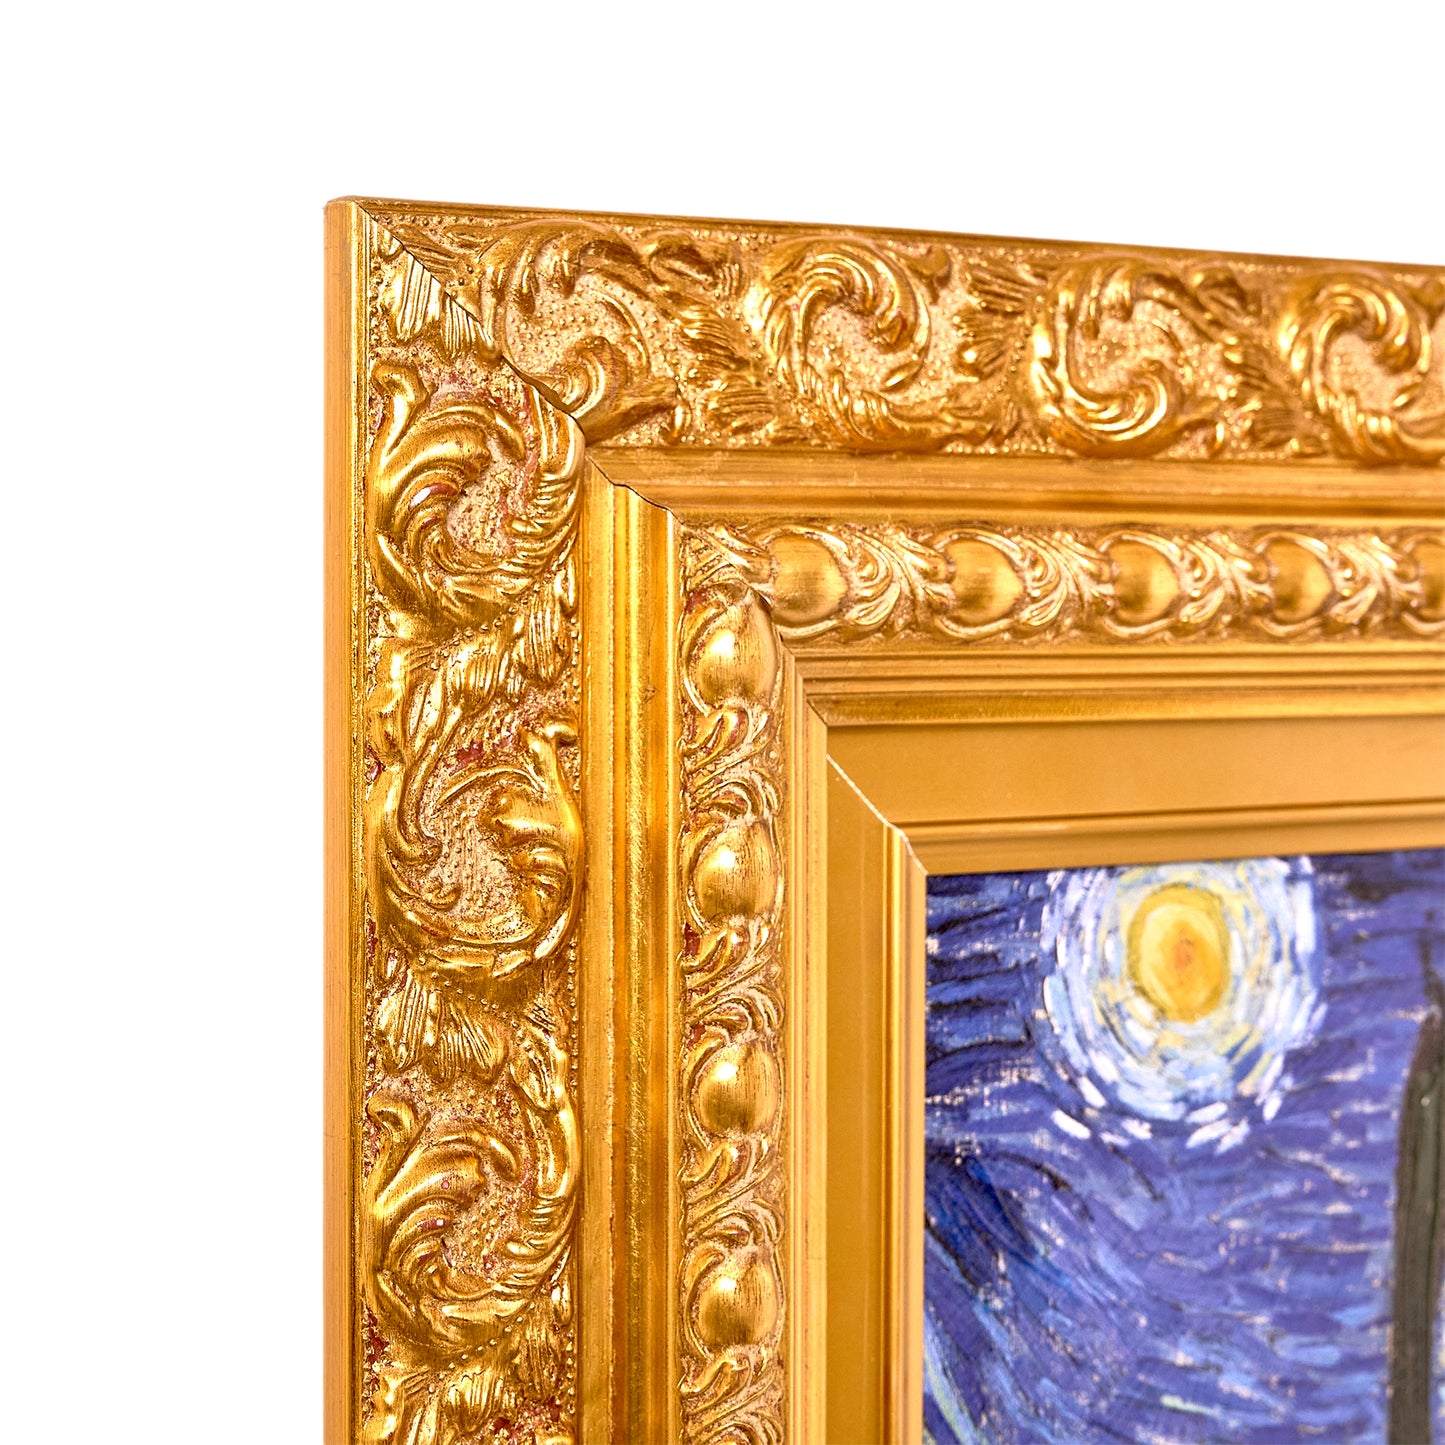 Ornate Framed Starry Night Canvas Print by Vincent van Gogh 27.75" x 31.5"